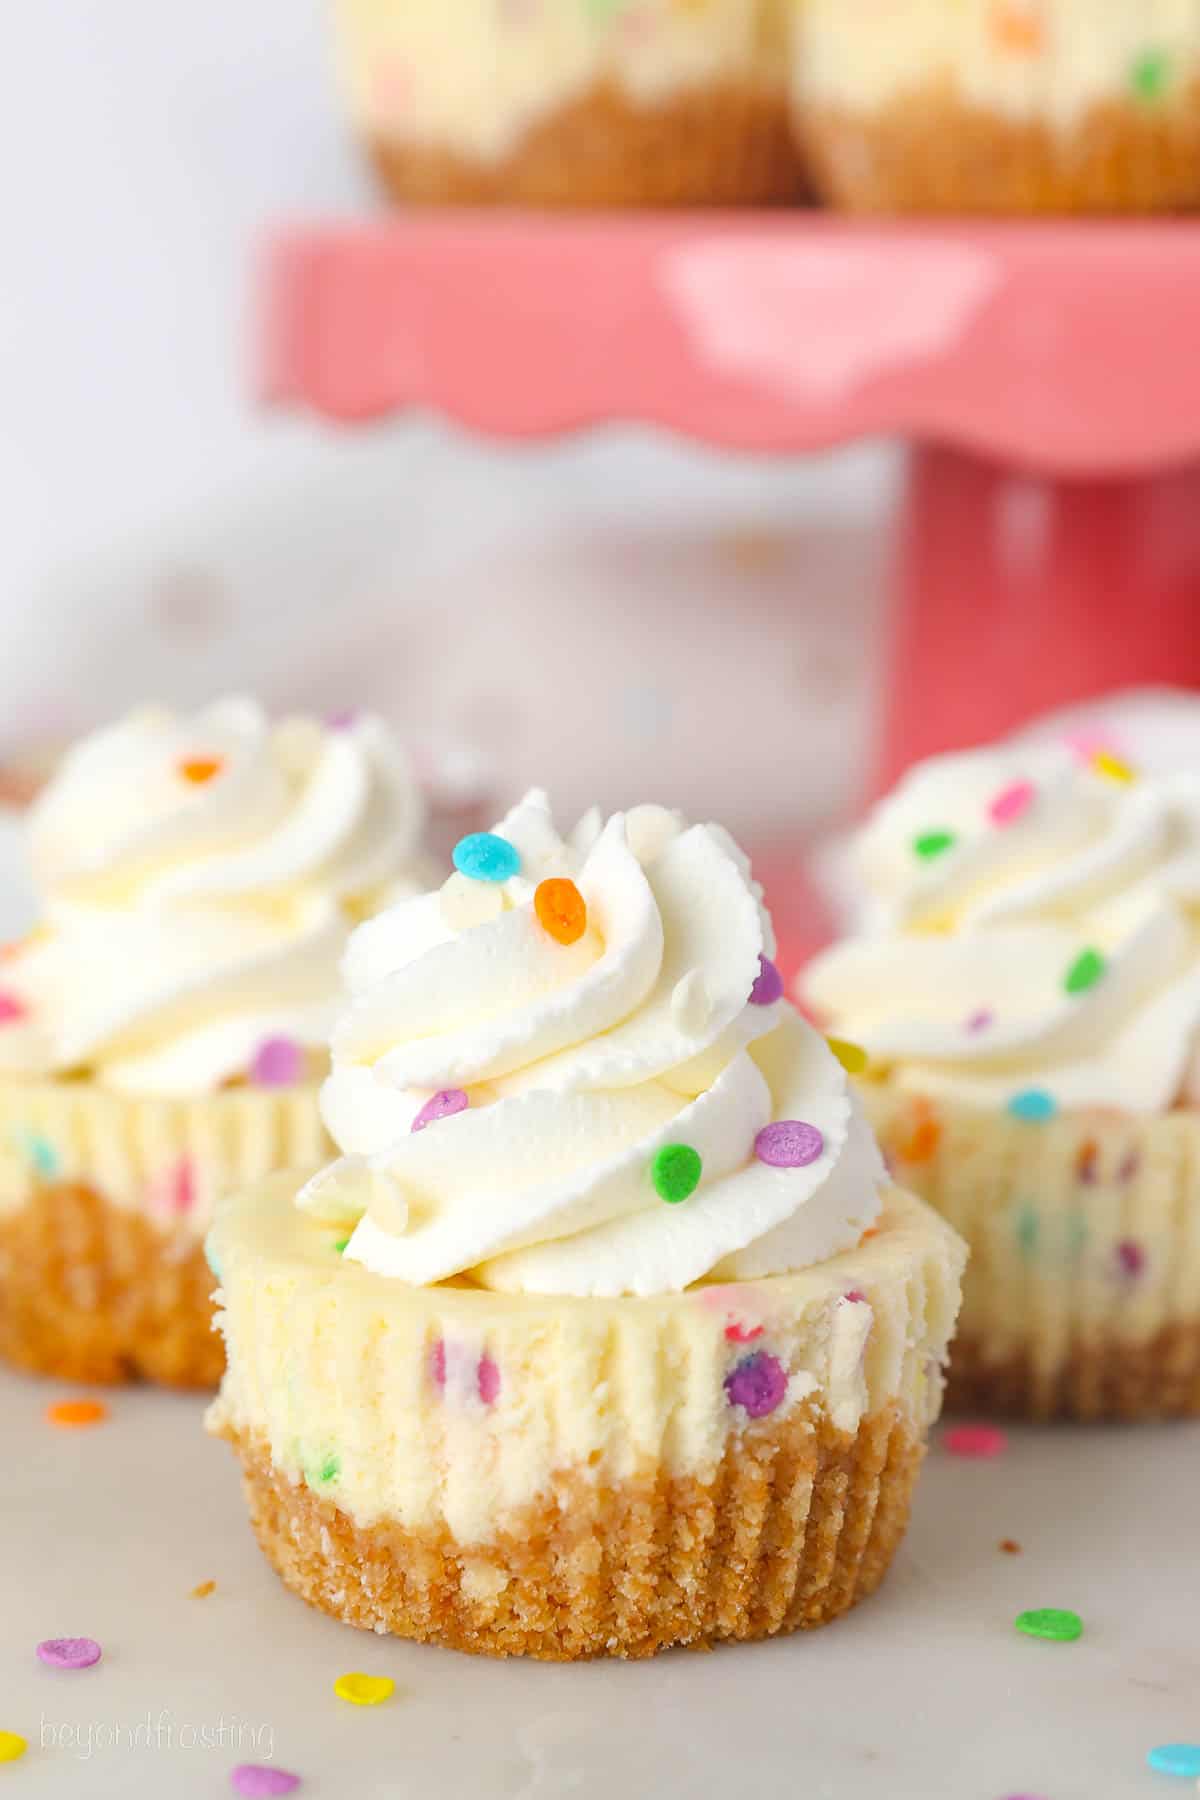 Mini funfetti cheesecakes topped with swirls of whipped cream and sprinkles, with a pink cake stand in the backgorund.